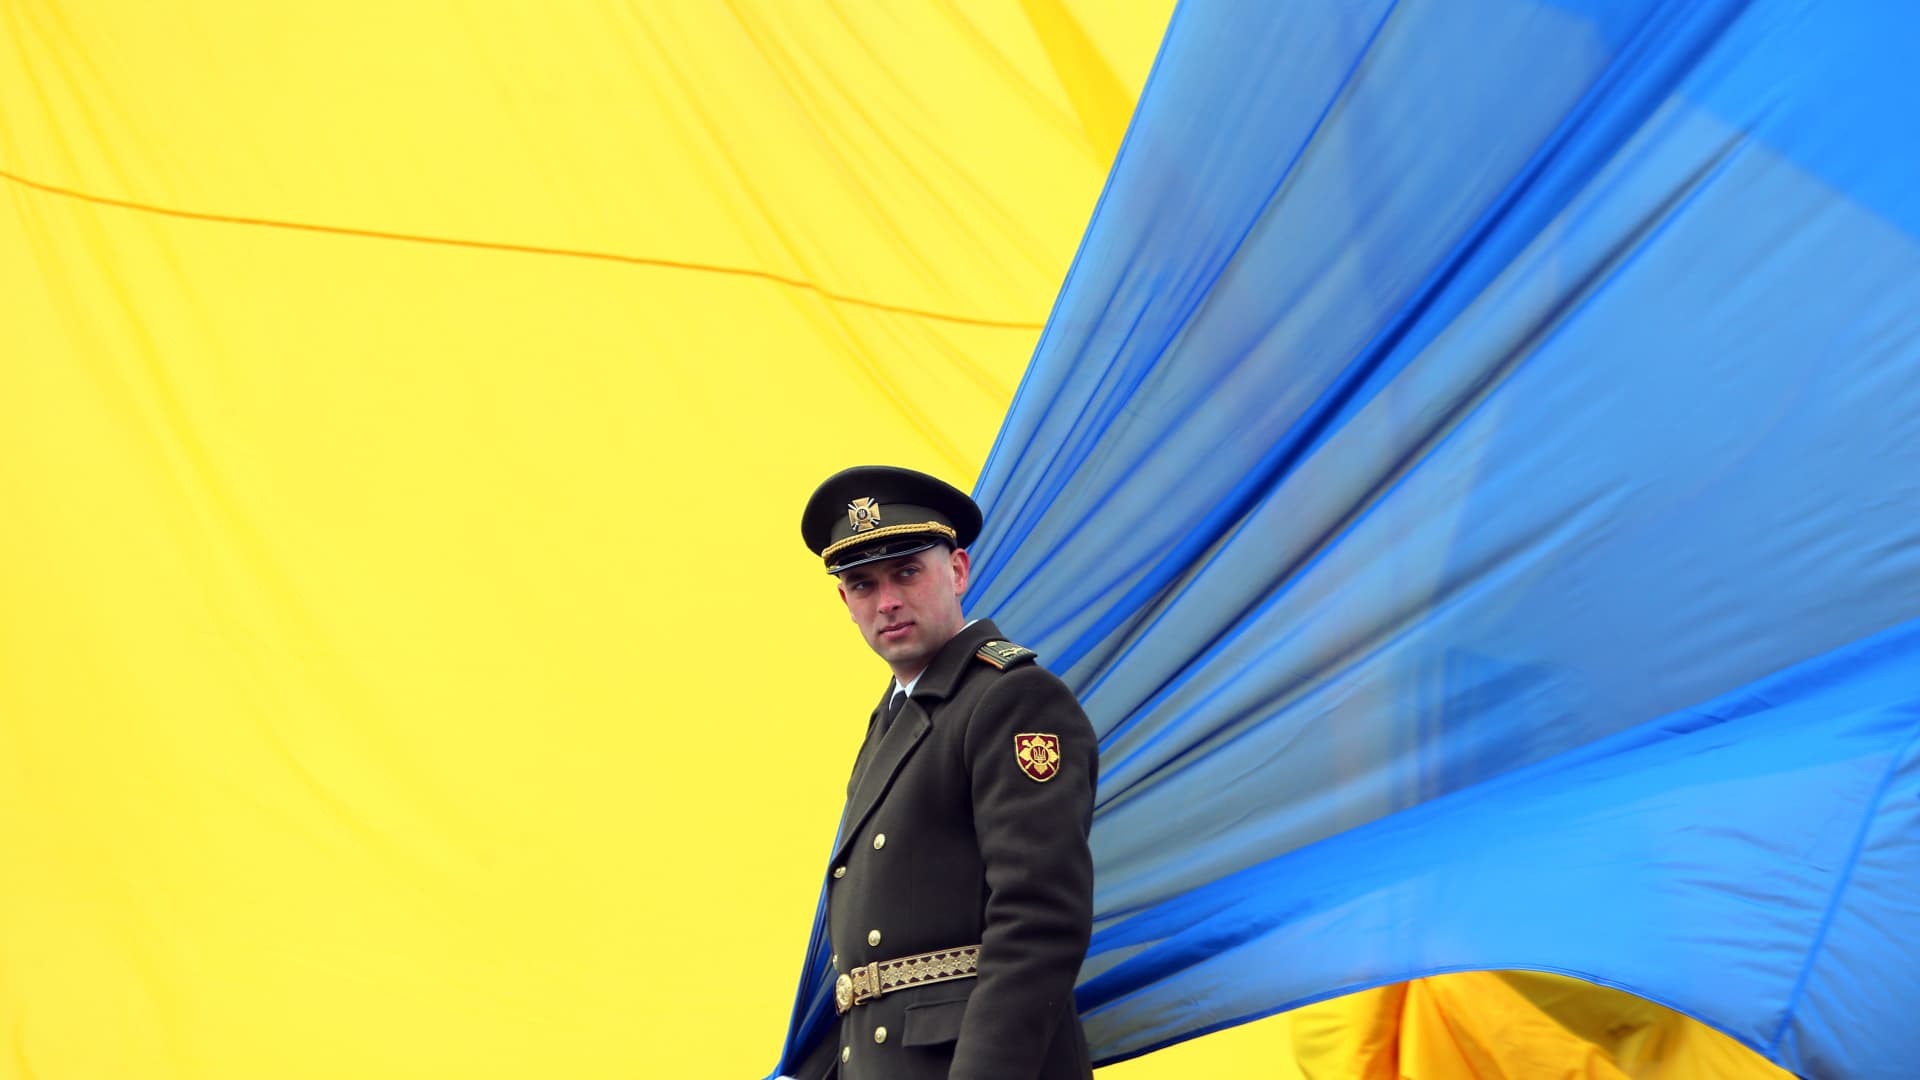 An Ukrainian servicemen waits for national flag raising ceremony as Ukrainian President Volodymyr Zelensky and foreign leaders President of Moldova Maia Sandu, Prime Minister of Croatia Andrej Plenkovic, Prime Minister of Slovenia Robert Golob and Prime Minister of Slovakia Eduard Heger will take part at an event dedicated to the first anniversary of the Bucha liberation from Russian troops, in city of Bucha, not far from Kyiv, Ukraine on 31 March 2023, amid Russia's invasion of Ukraine. 